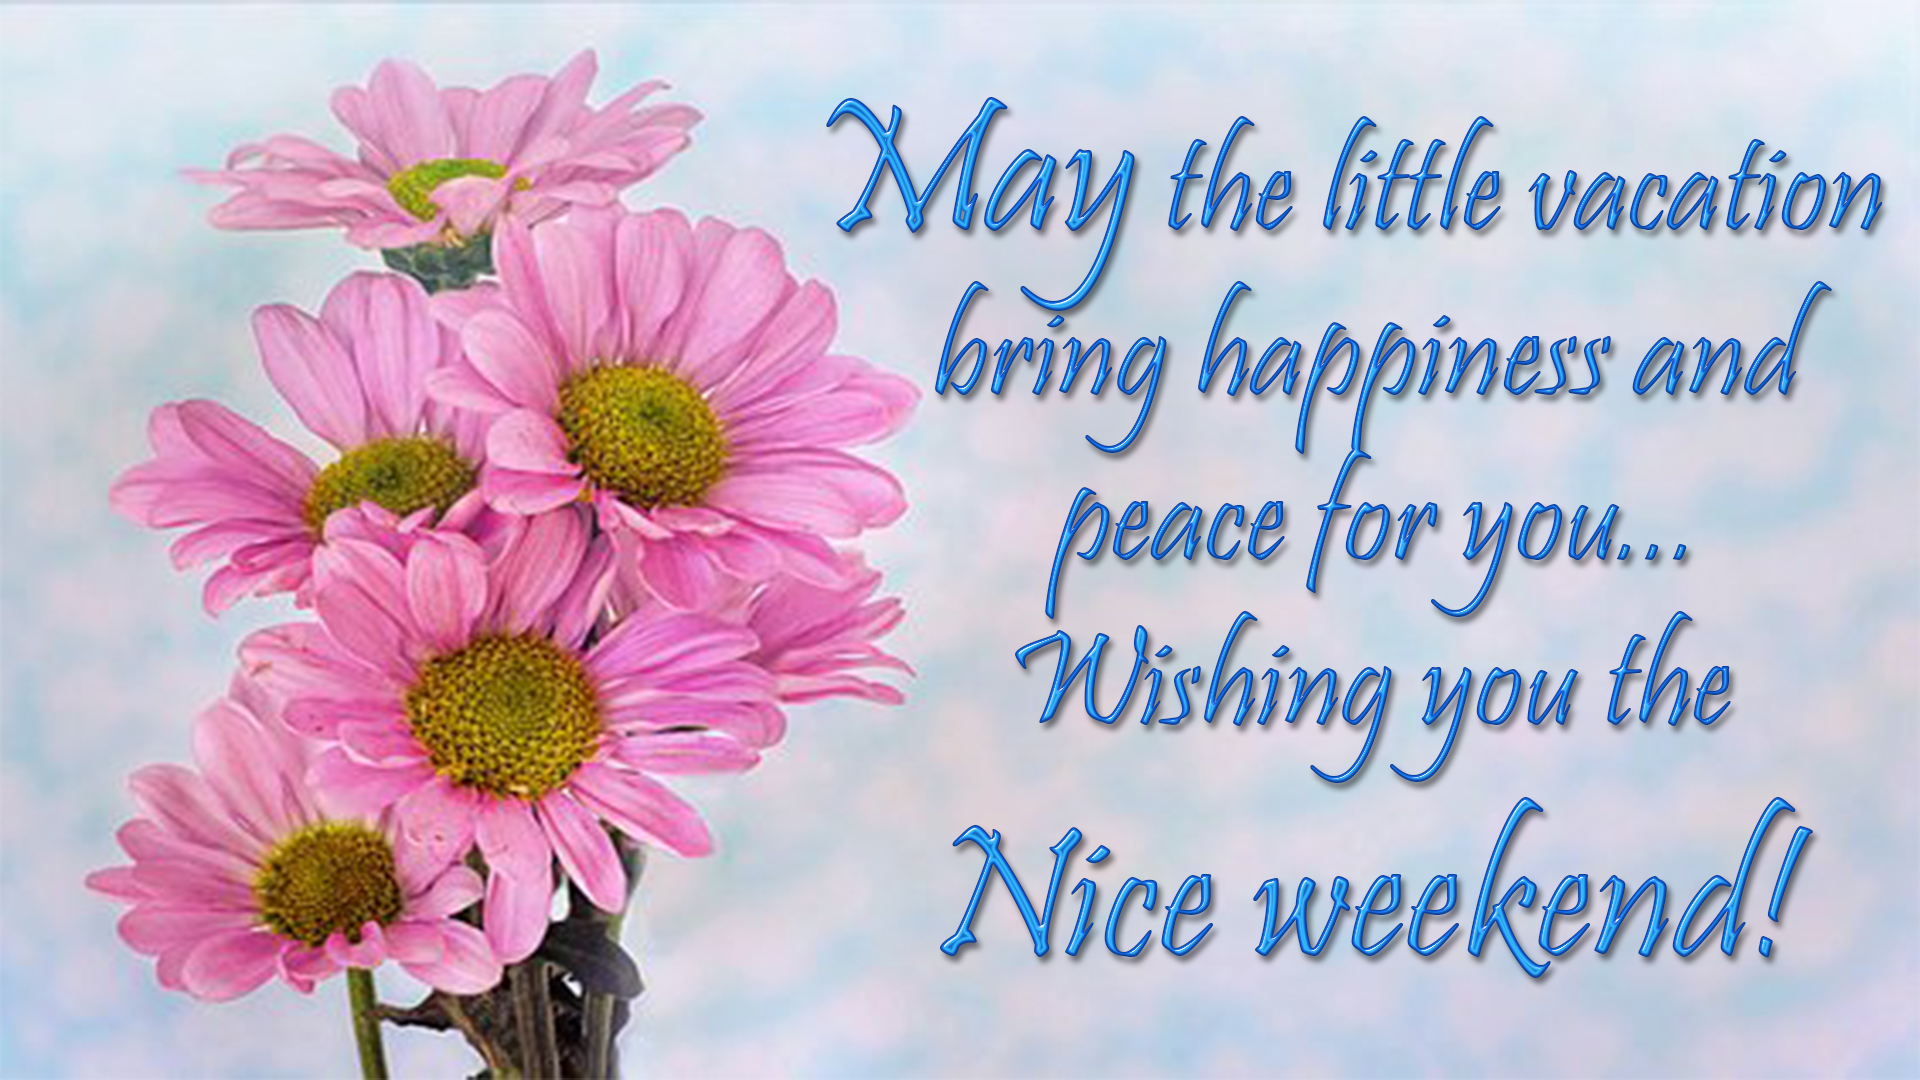 Happy Weekend Image With Beautiful Wishes. Have a Nice Weekend